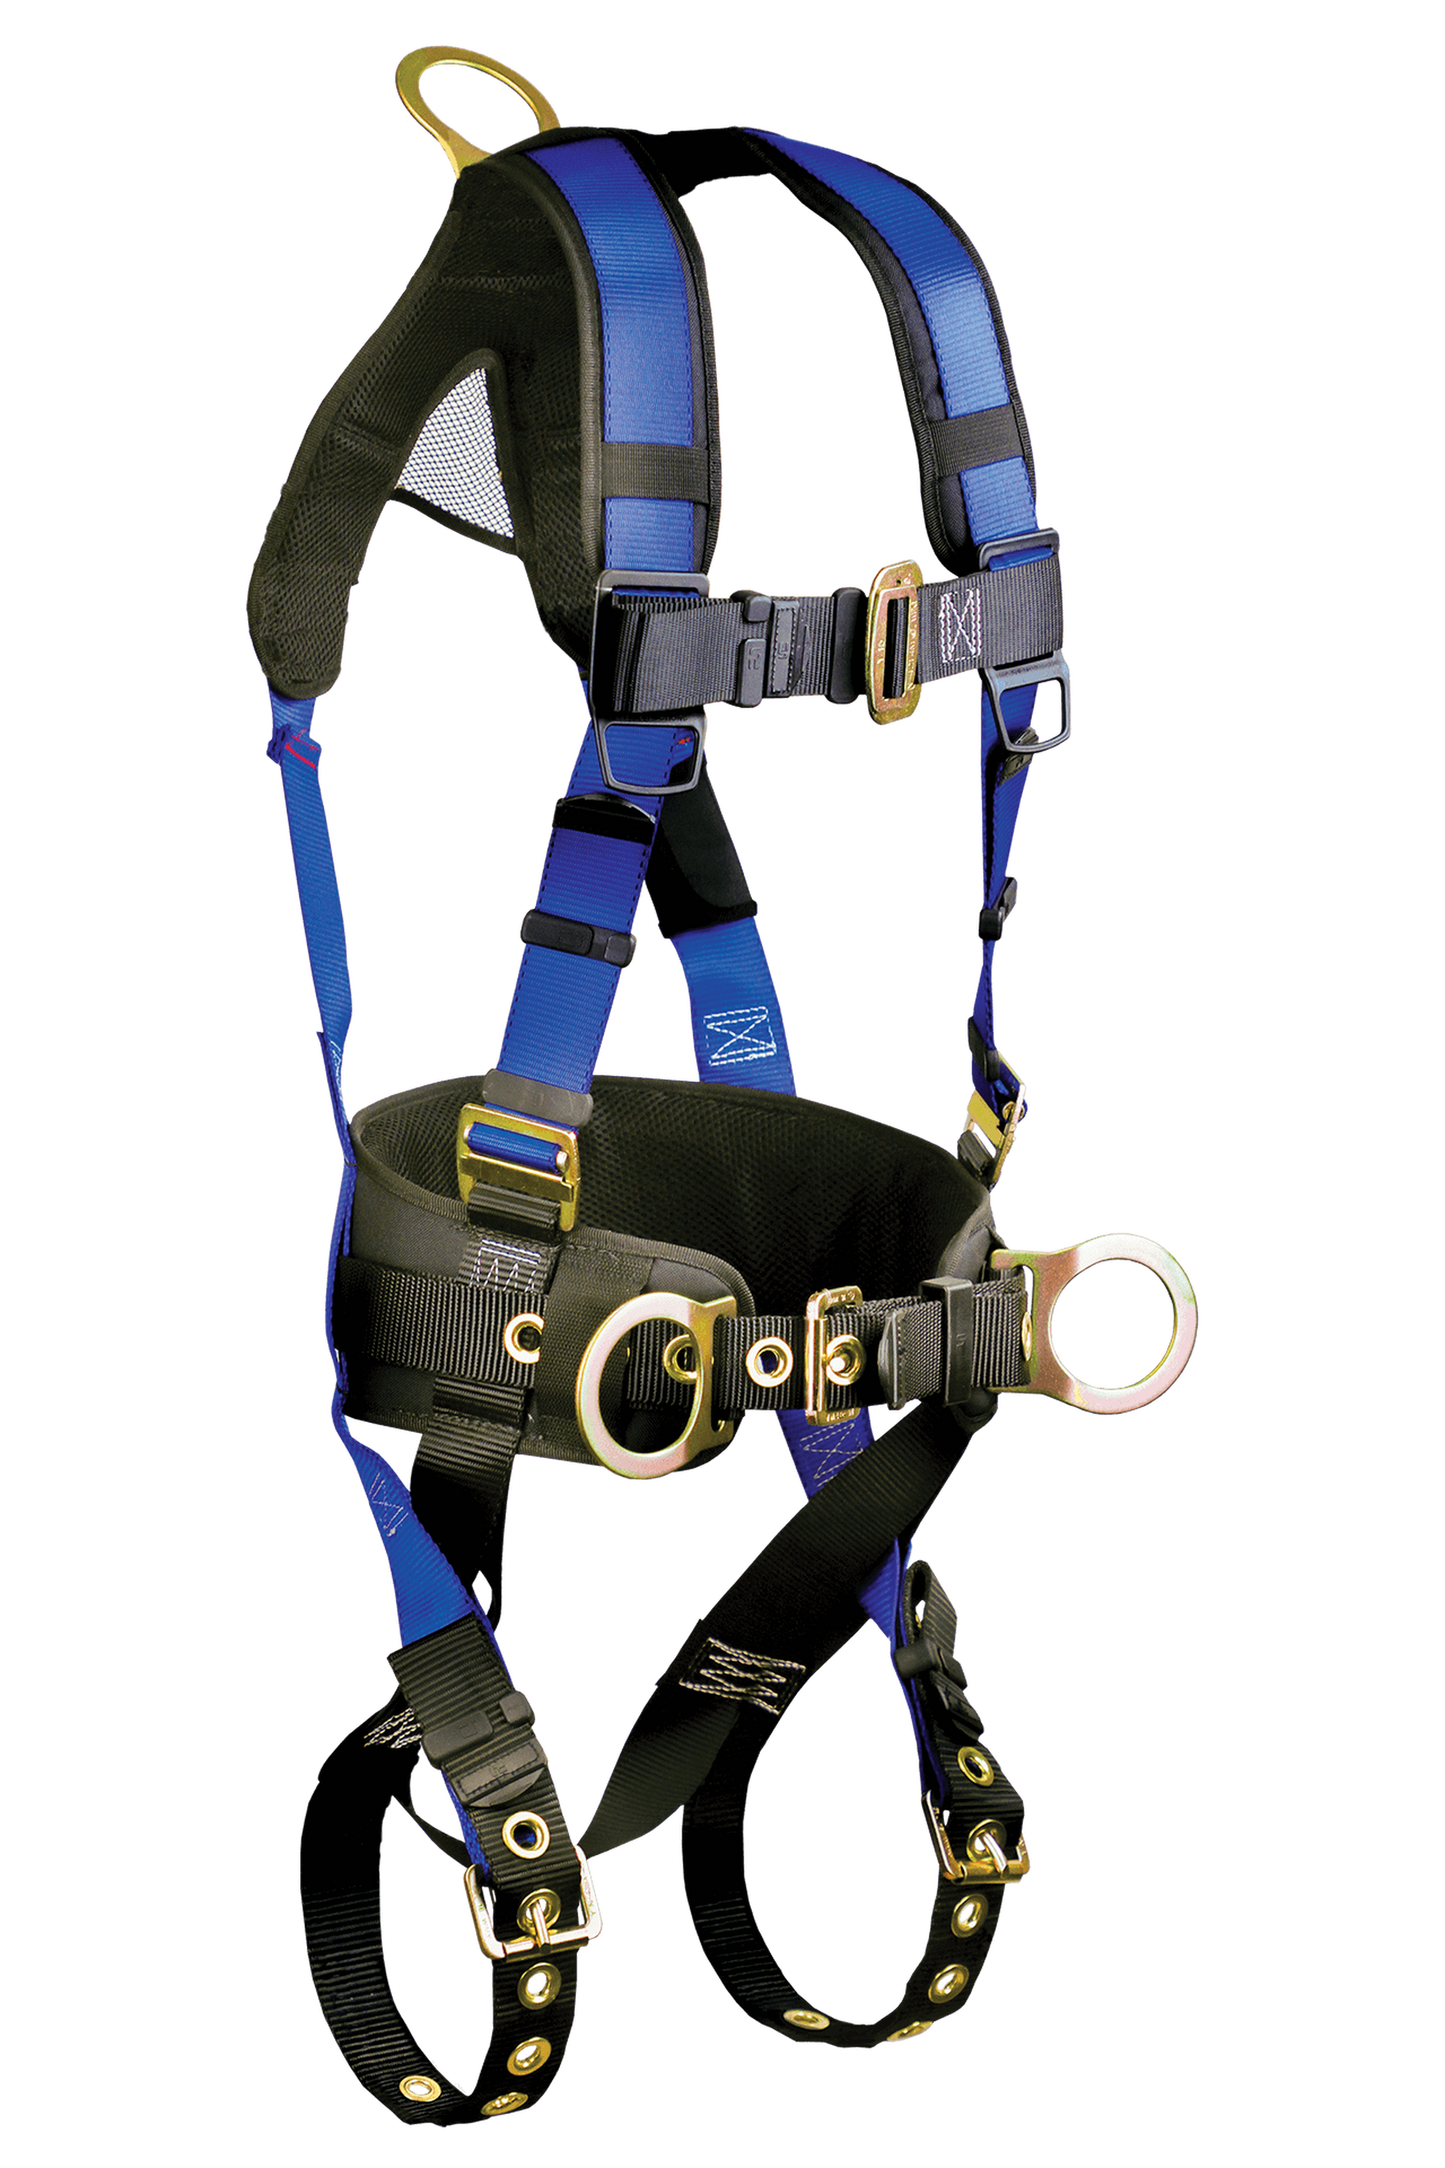 Contractor Plus Fall Arrest Harness with Tool Belt